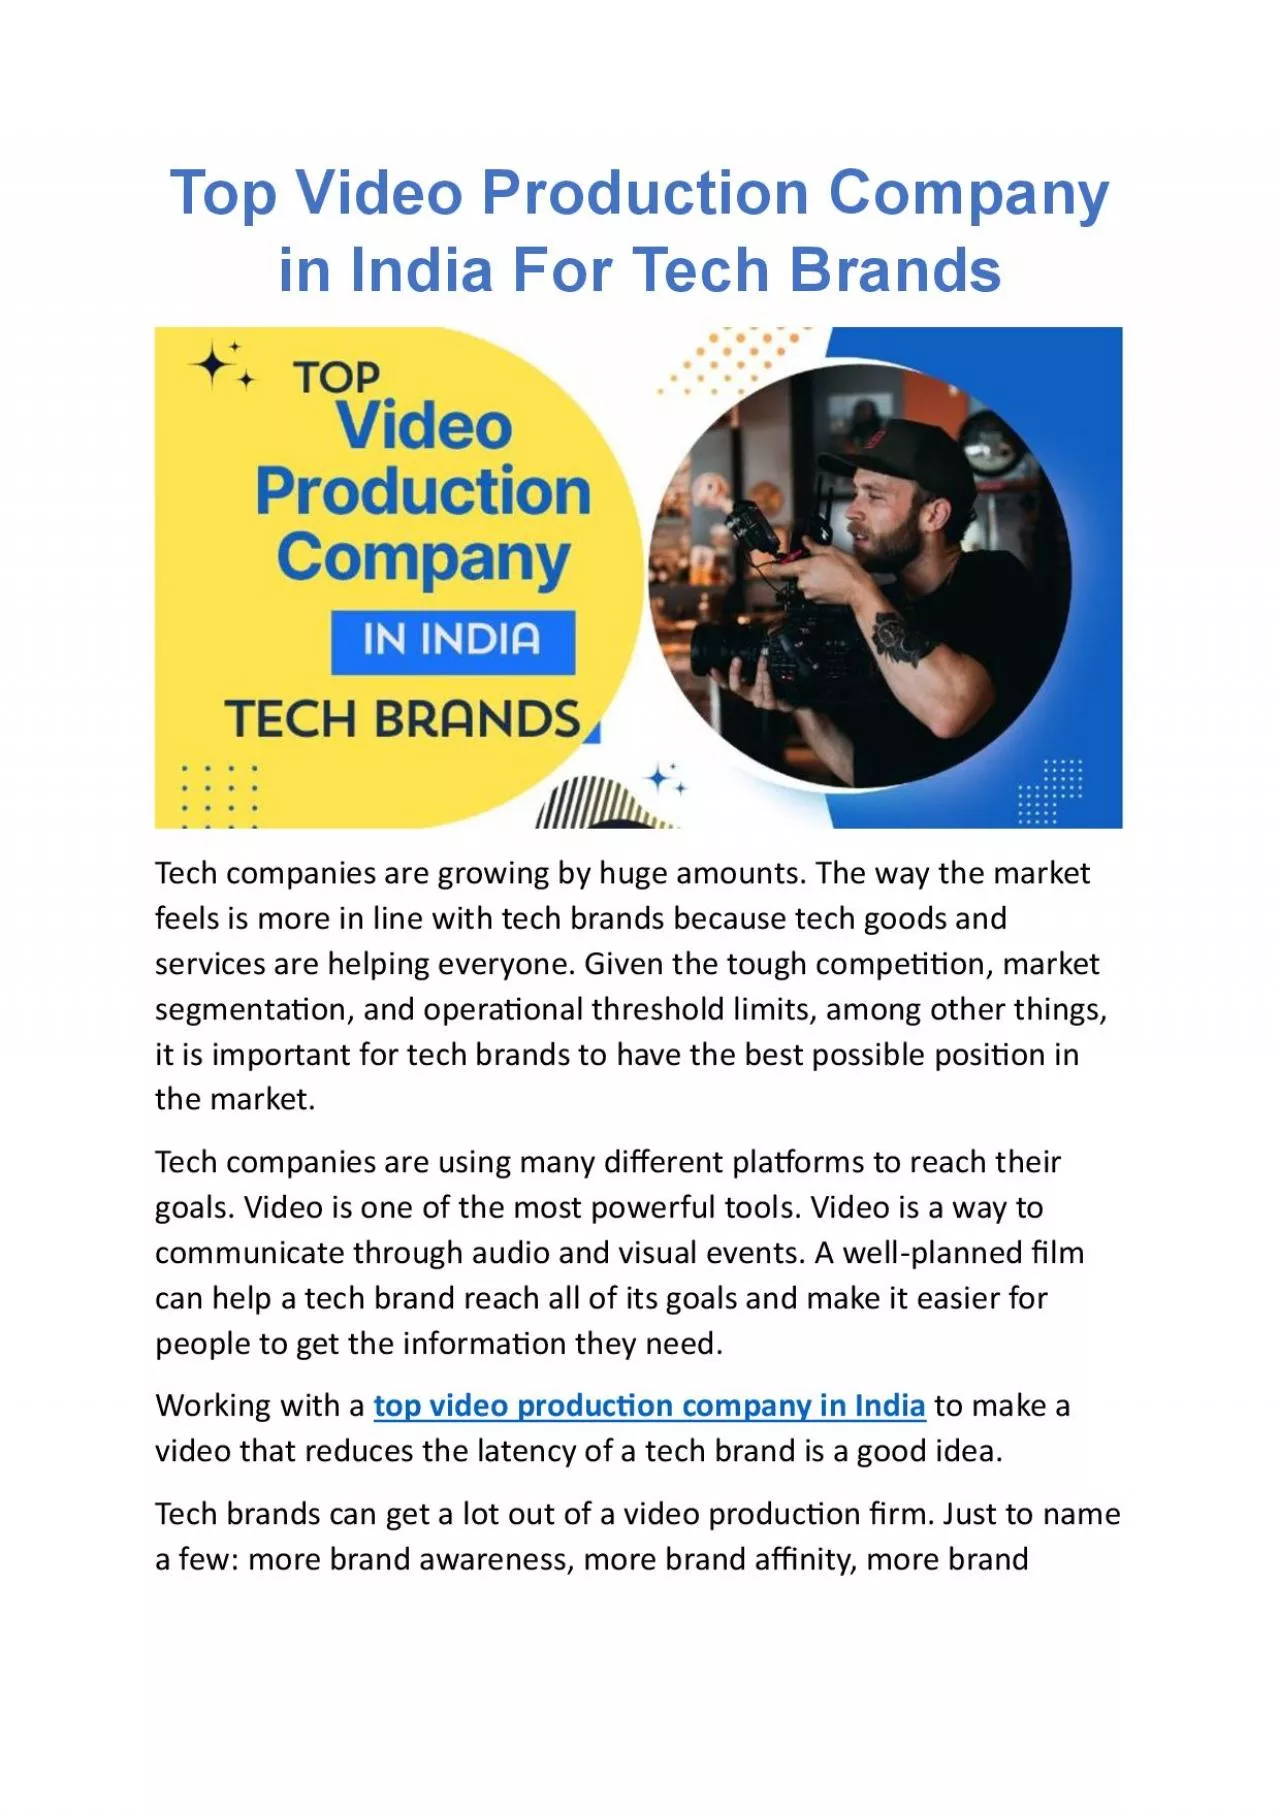 Top Video Production Company in India for Tech Brands